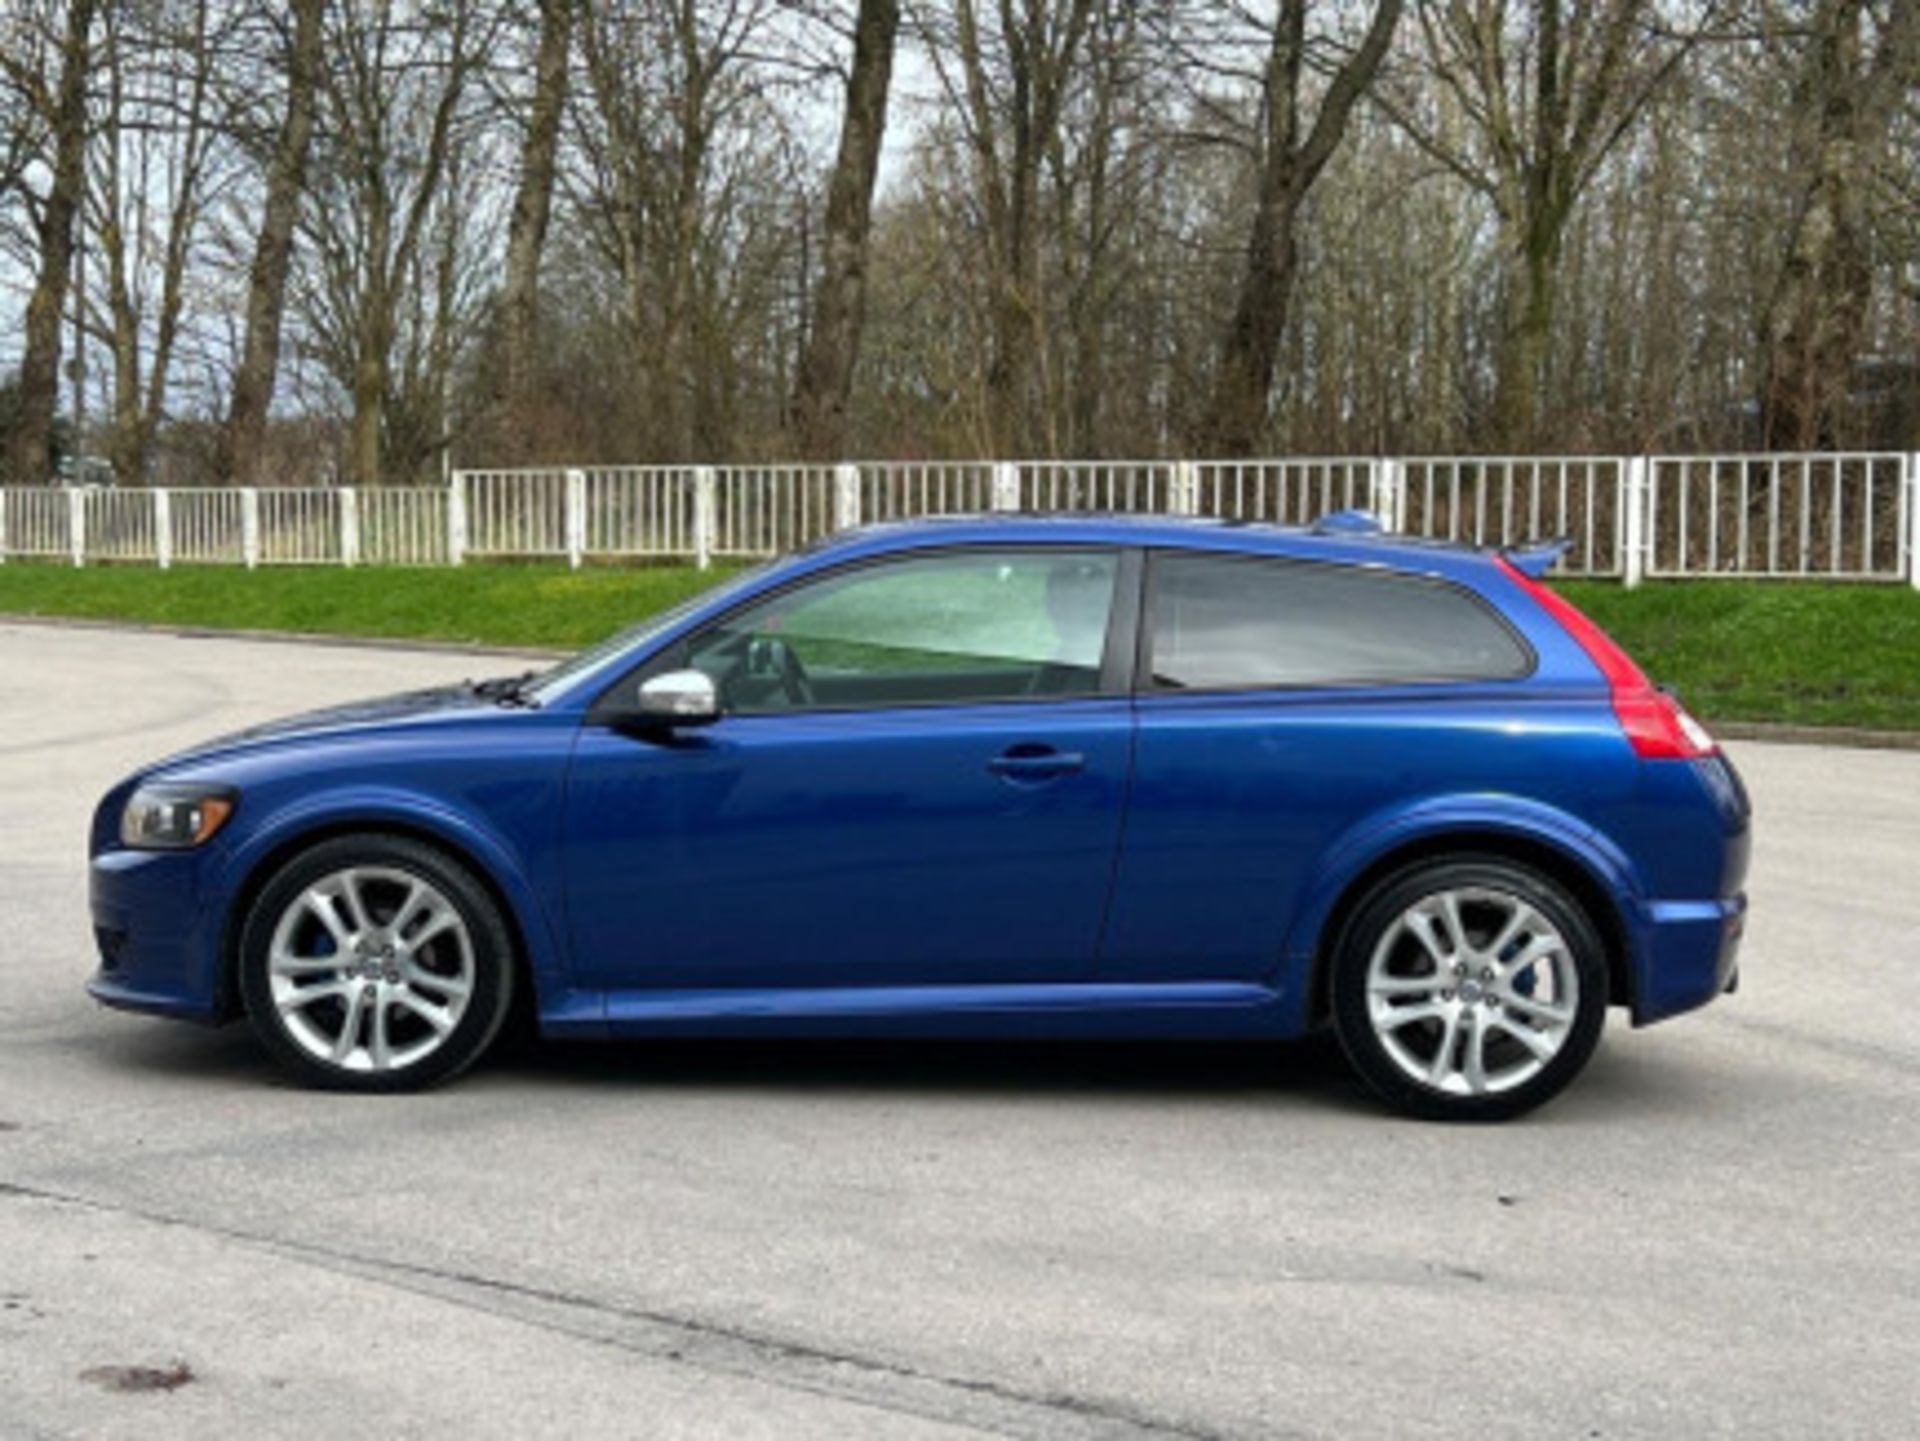 VOLVO C30 2.0D R-DESIGN SPORT 2DR - SPORTY AND LUXURIOUS COMPACT CAR >>--NO VAT ON HAMMER--<< - Image 37 of 103